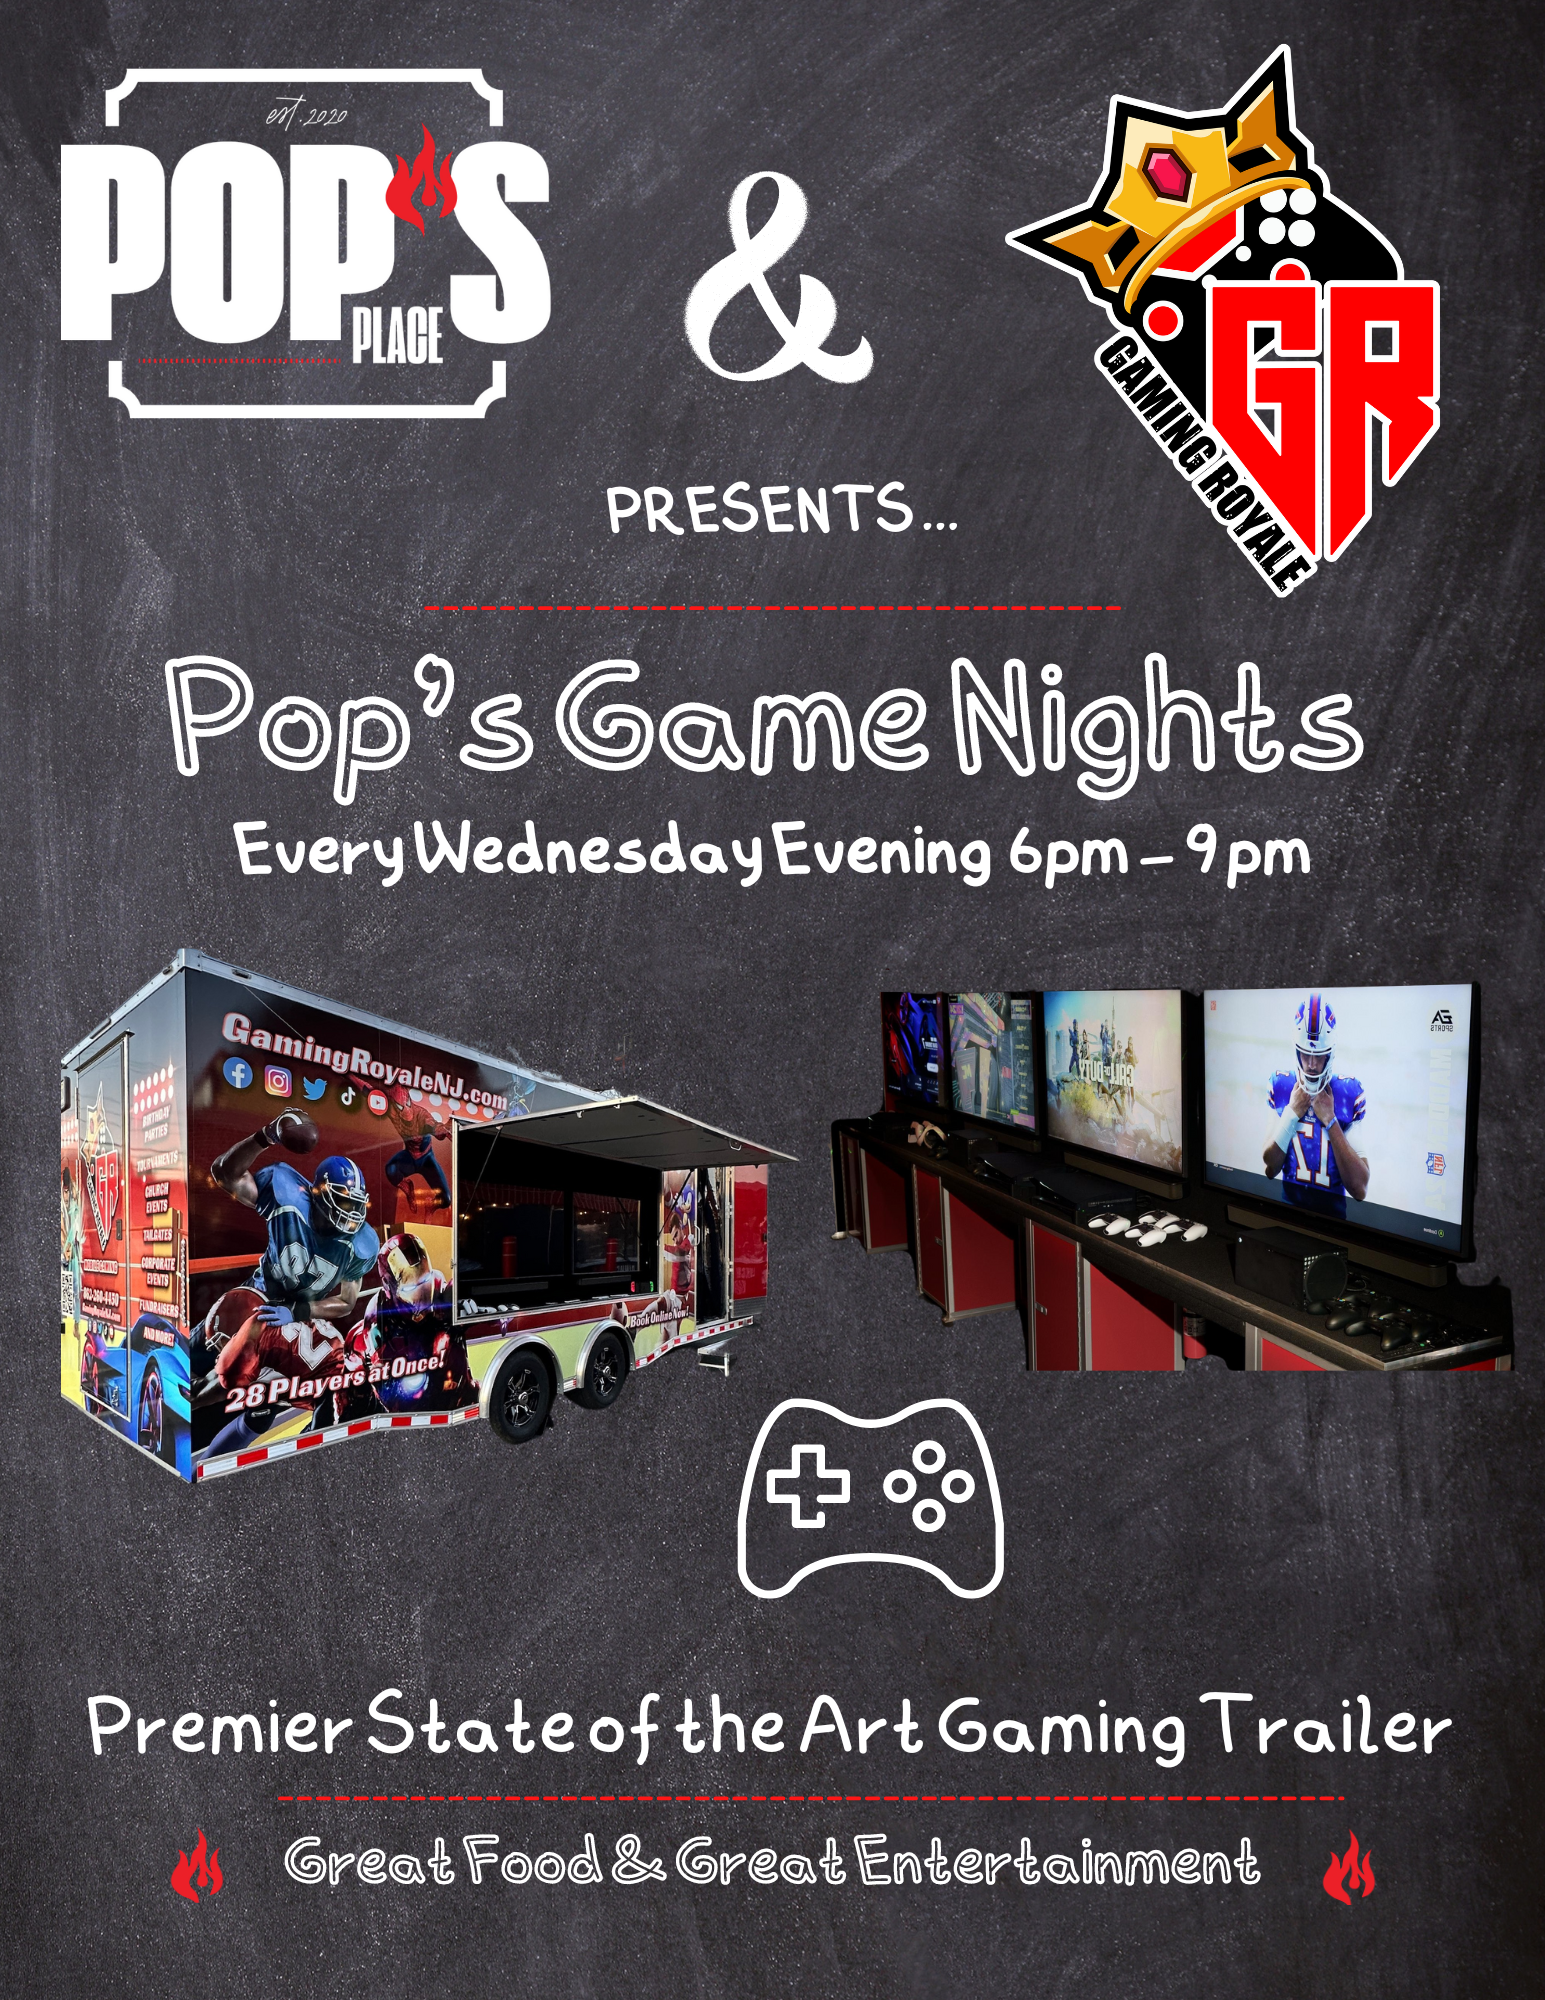 Game nights every Wednesday evening from 6-9pm